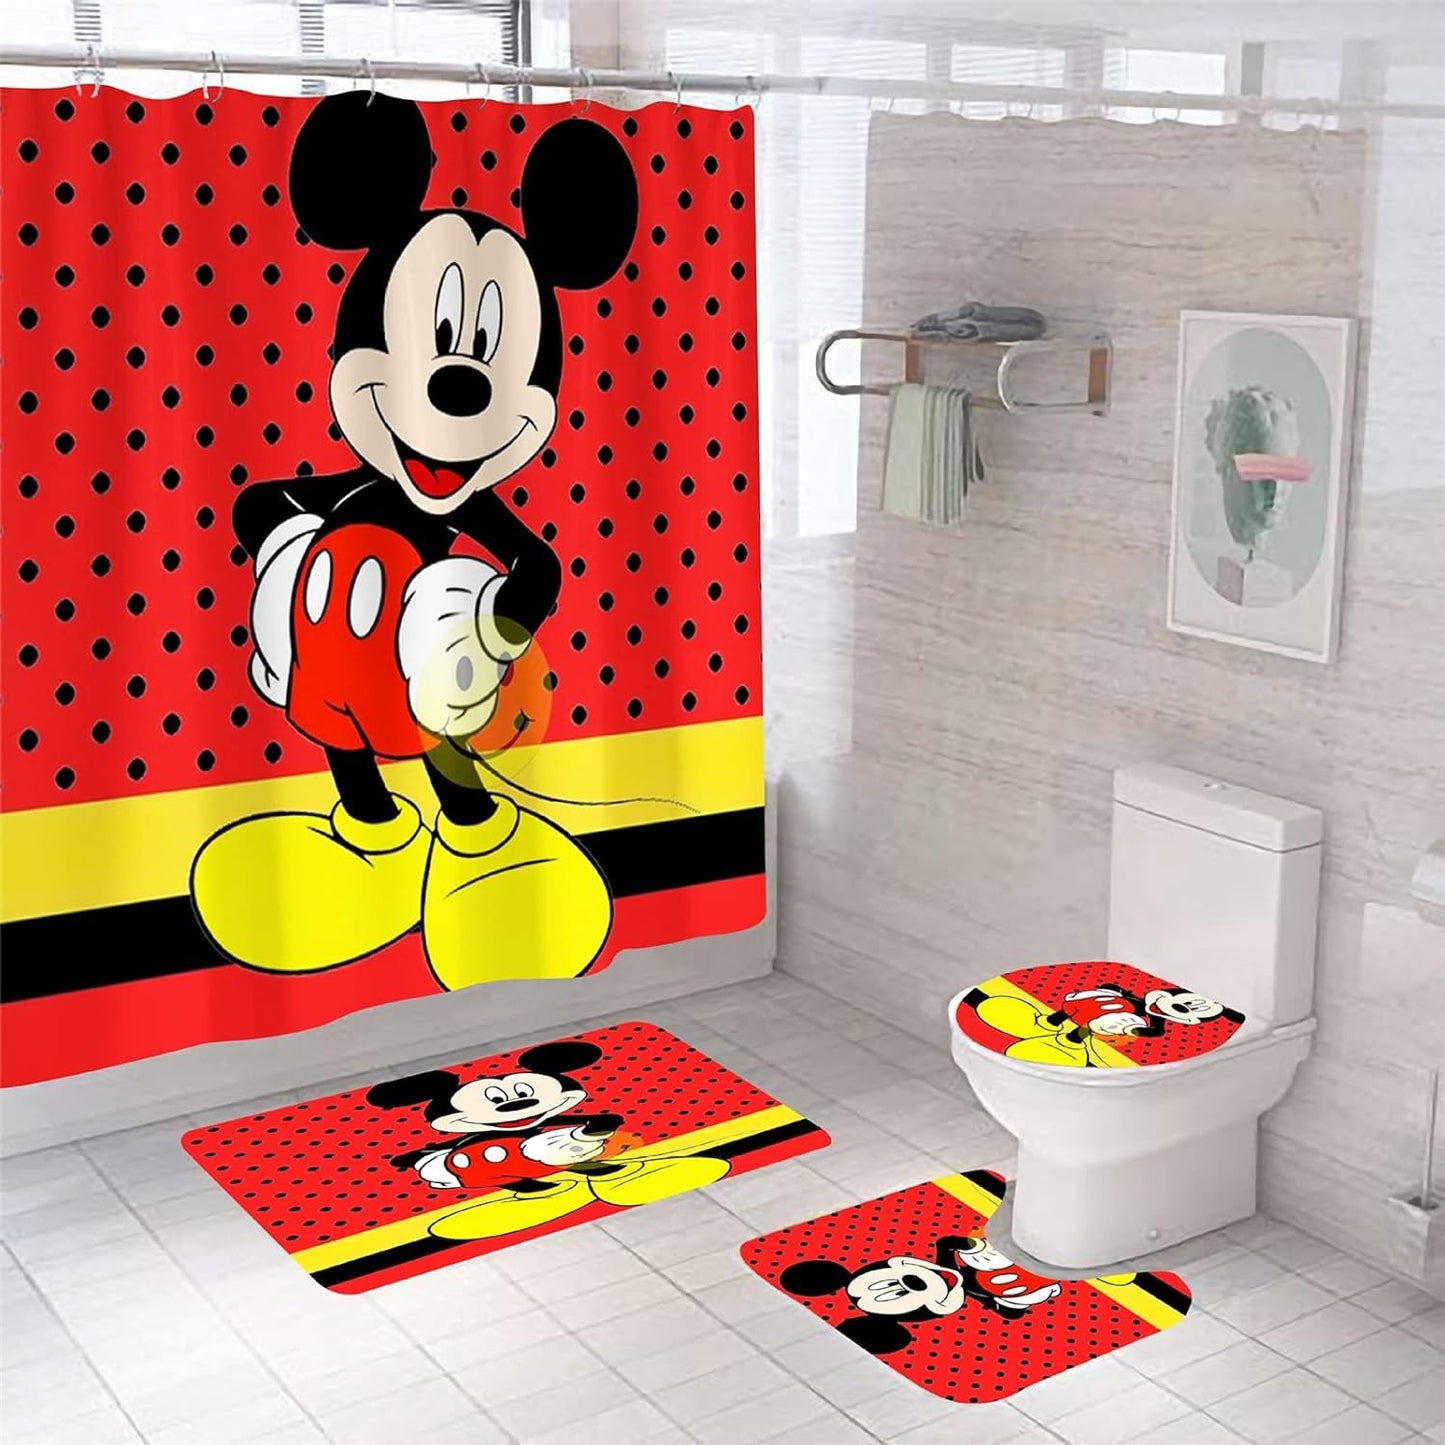 Red Polka Dot Mouse Shower Curtain